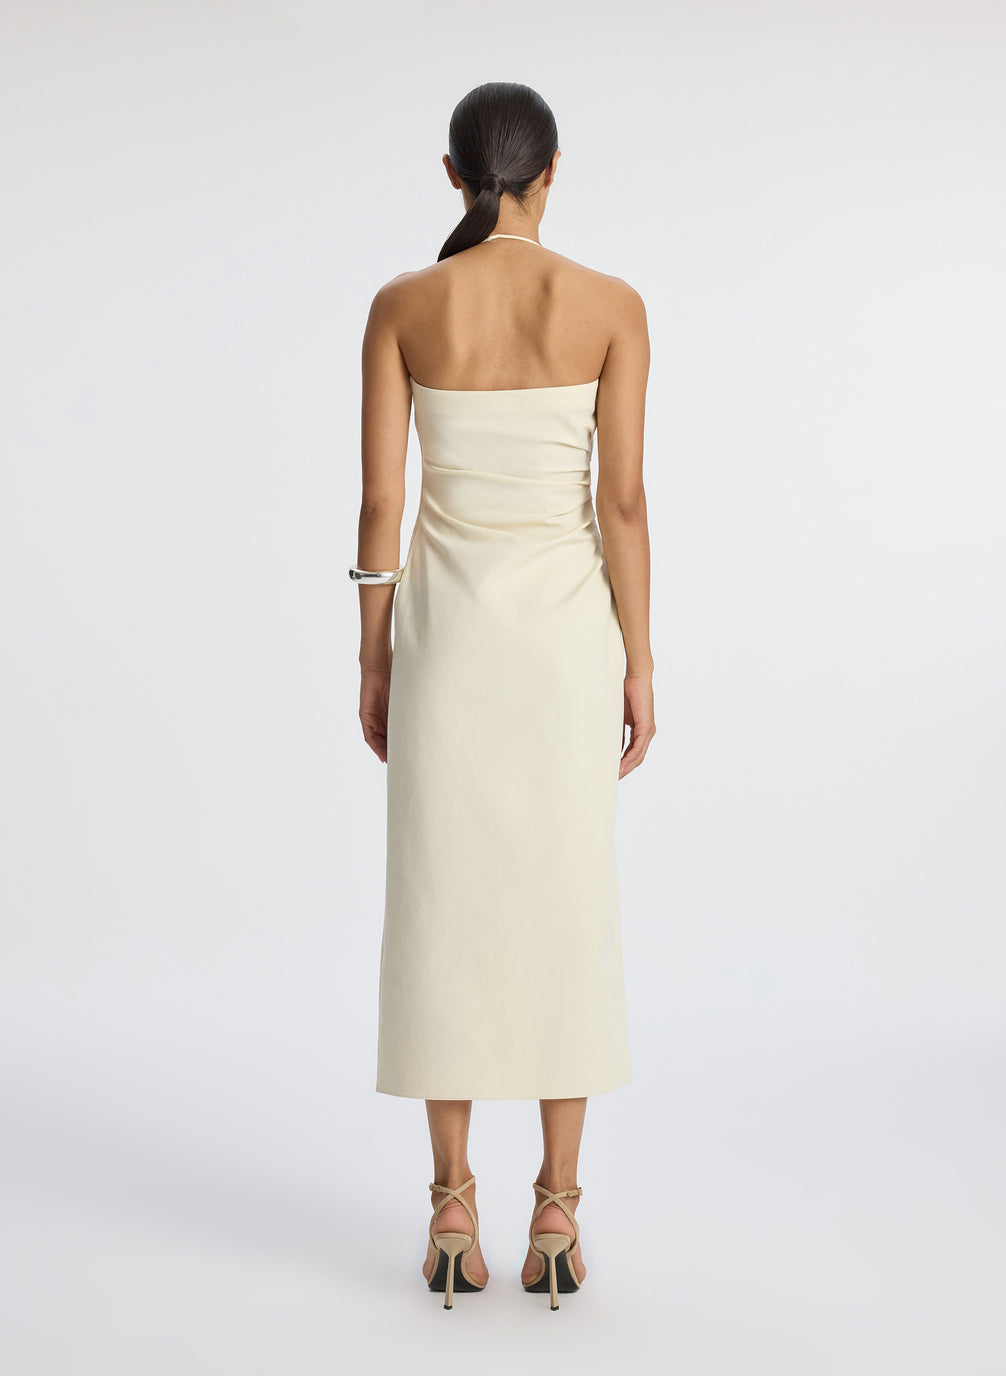 back view of woman wearing cream halter neckline ruched midi dress